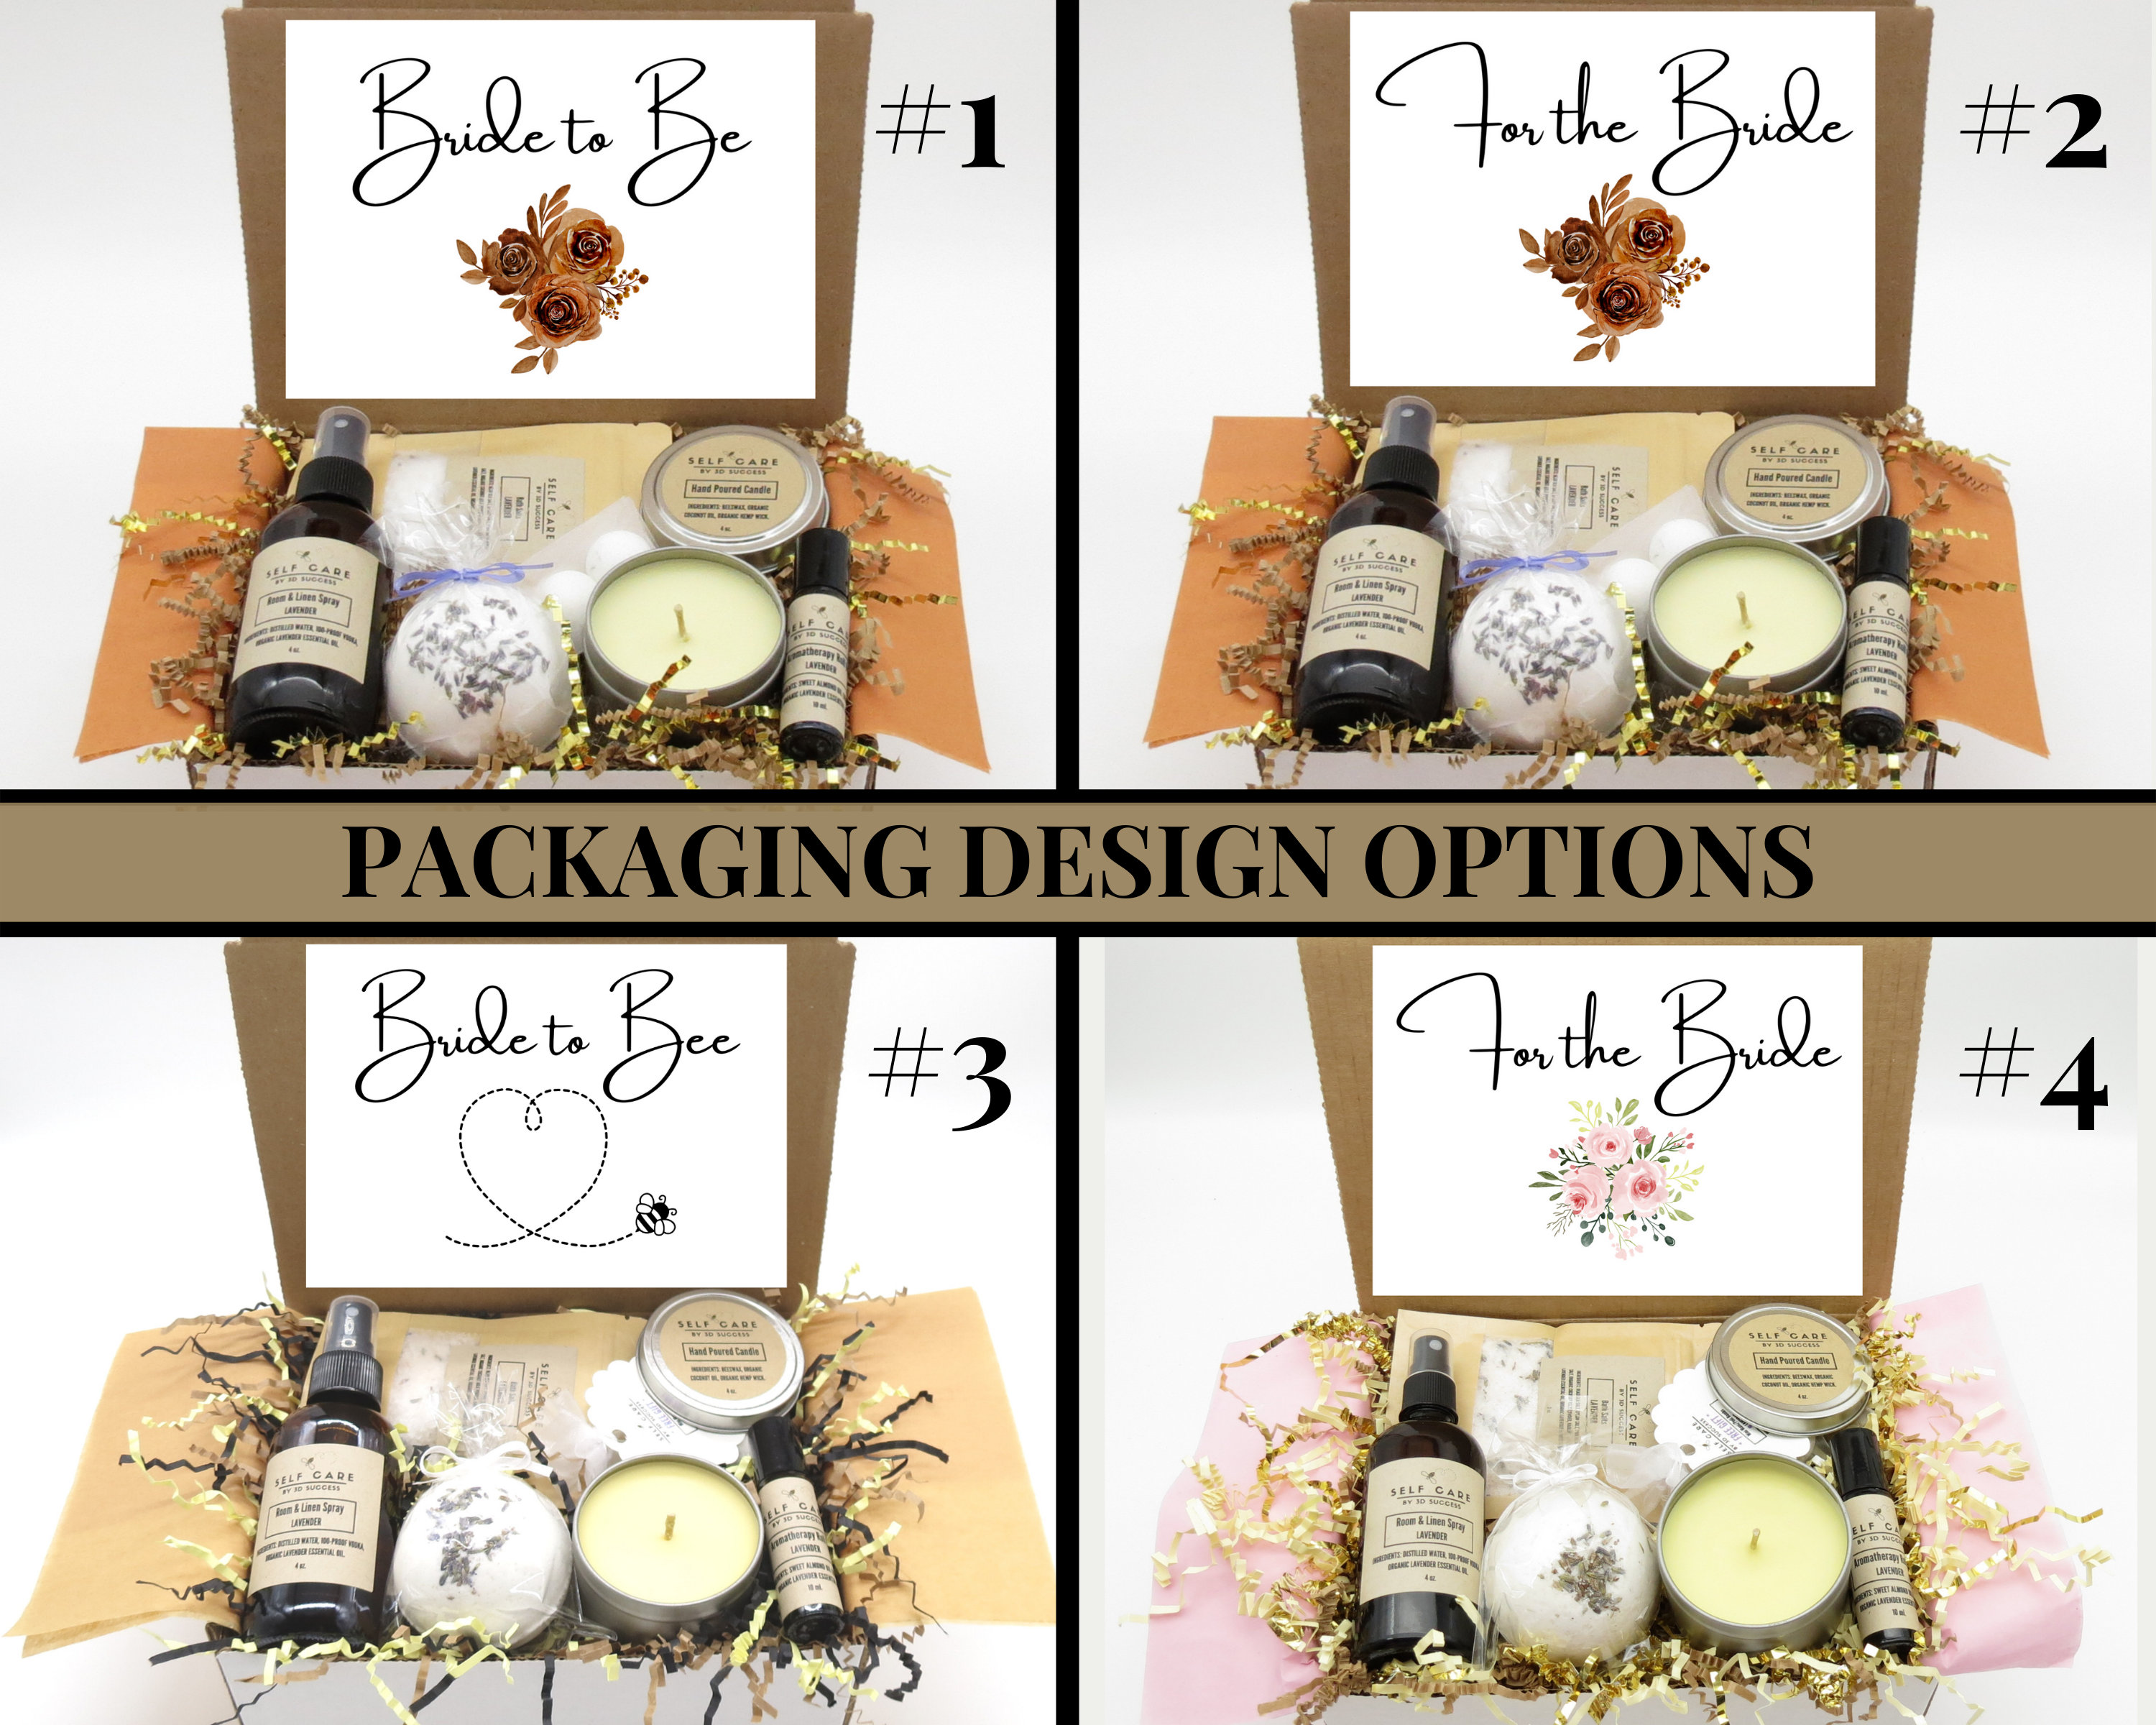 ZHAXIDELE Bride to Be Gifts Box - Perfect Bridal Shower Gifts for Bride to Be, Engagement Gifts for Her, or Bachelorette Gifts! Bride Box with